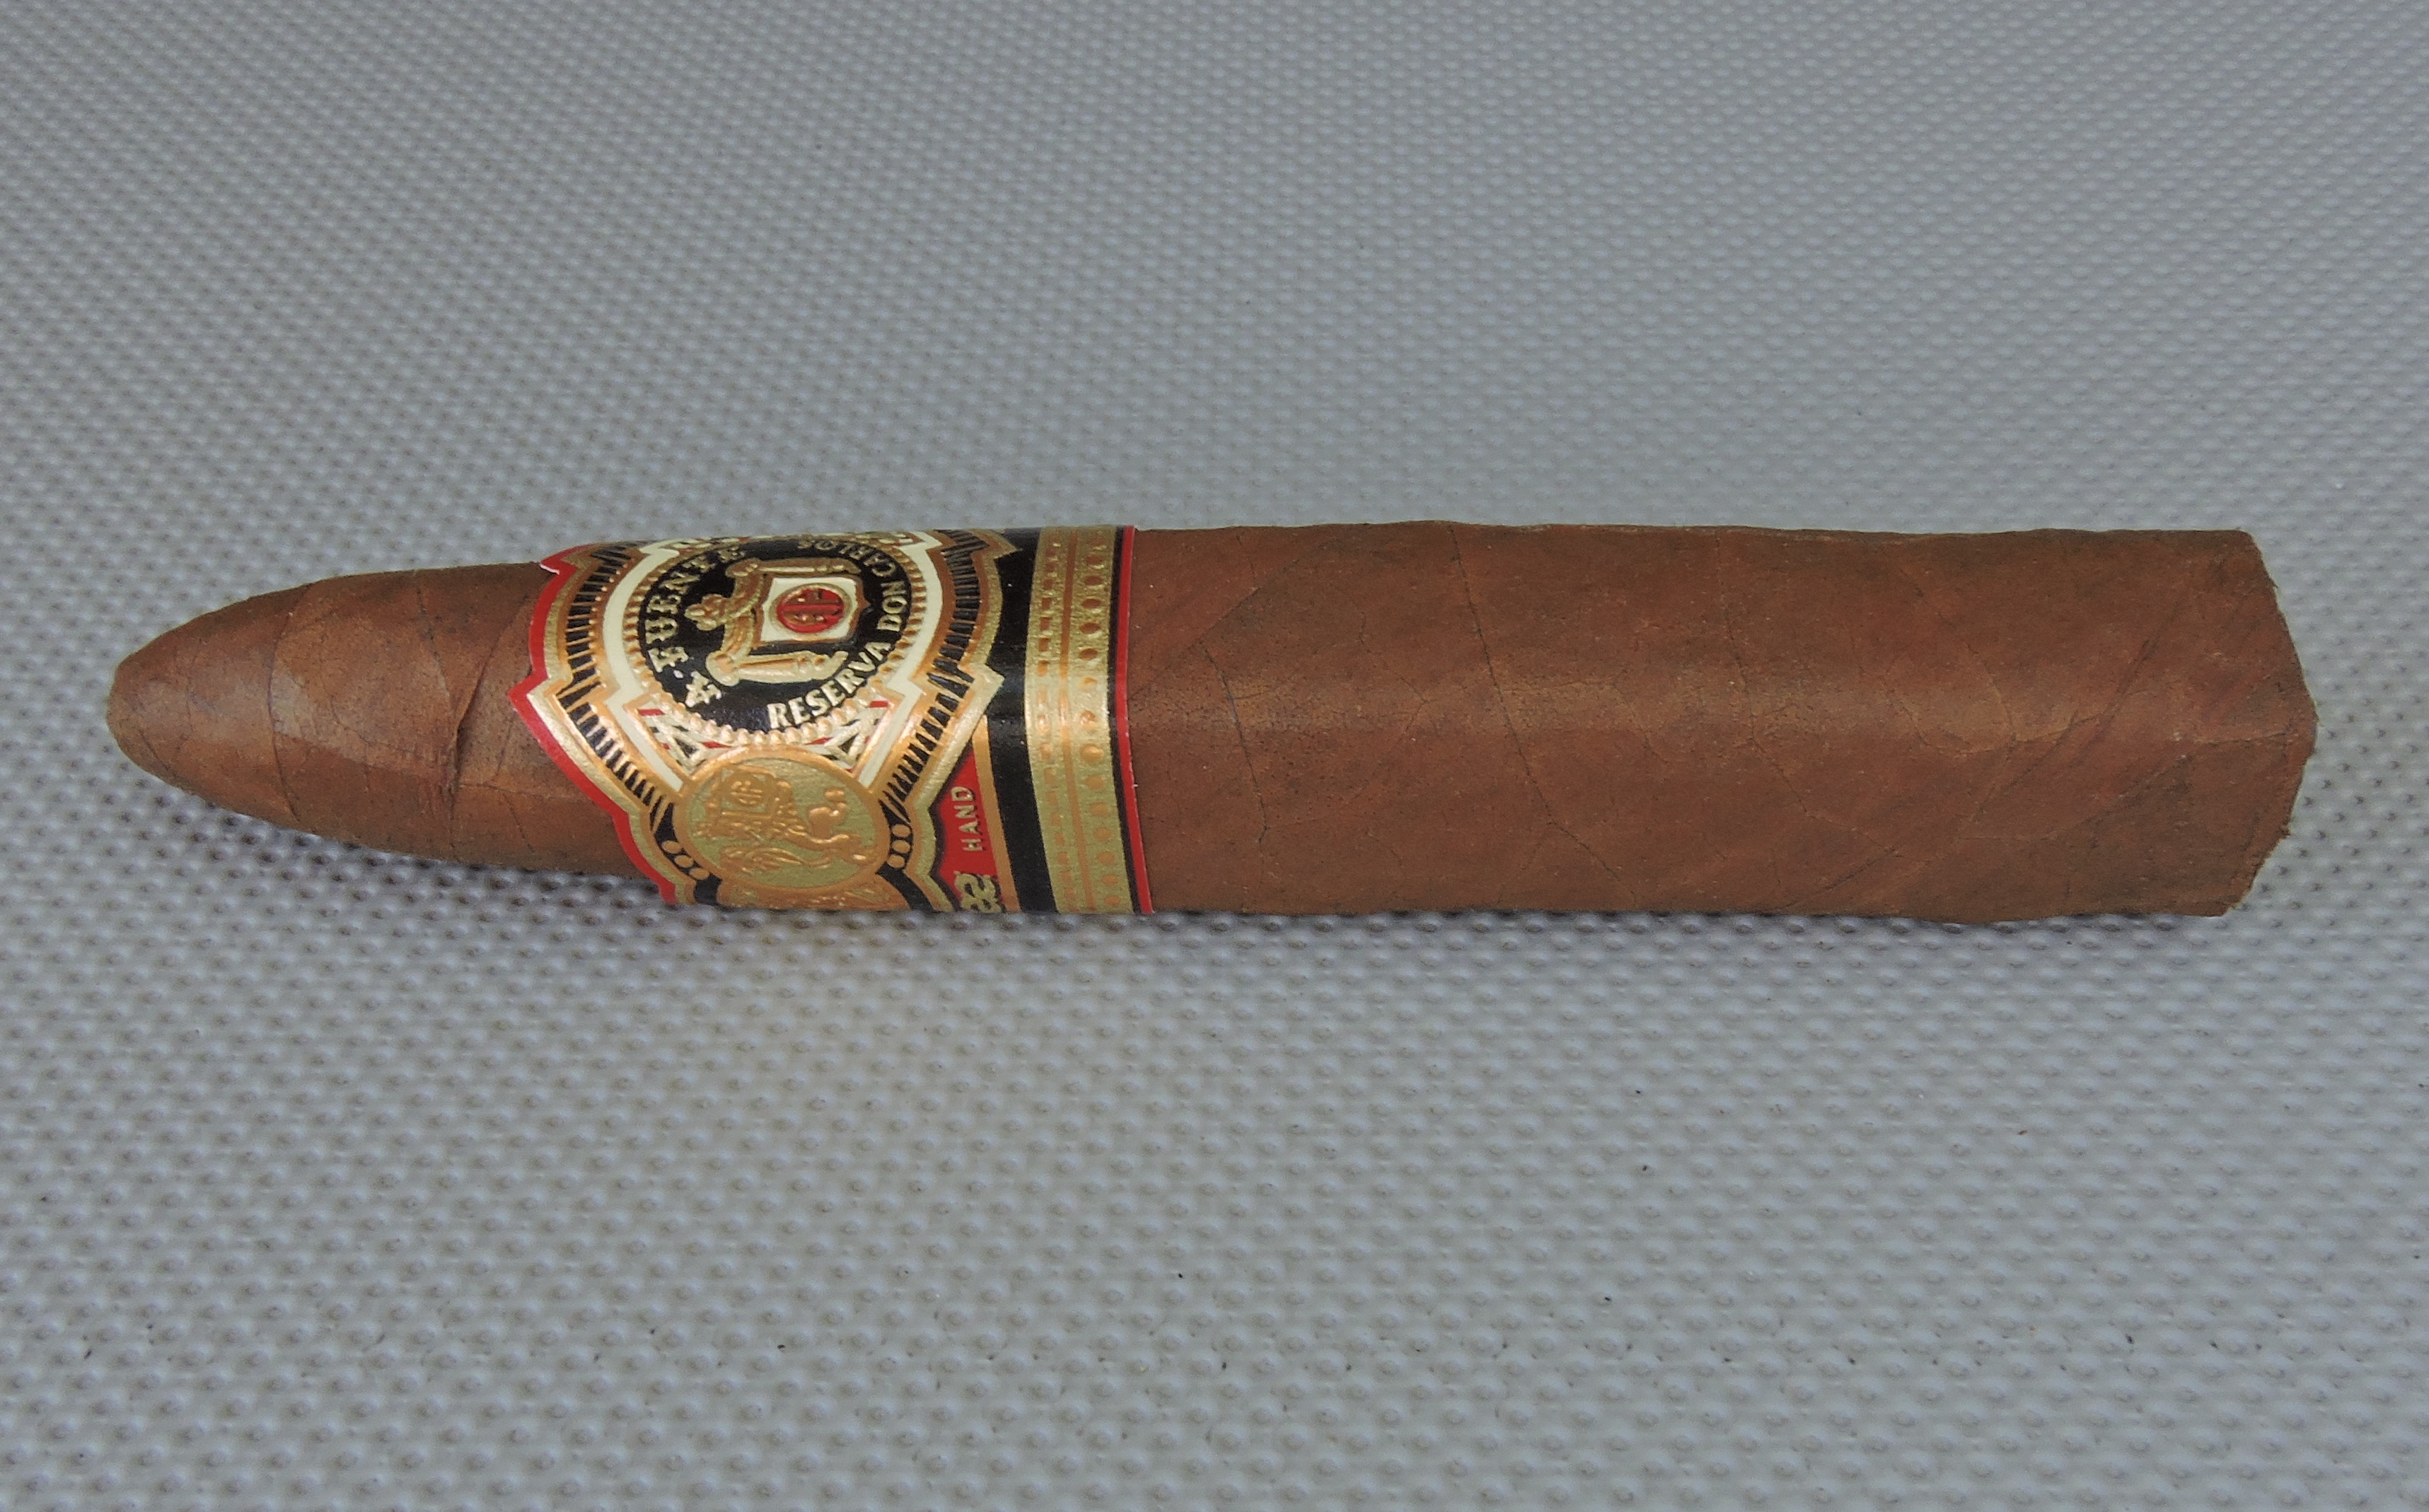 Arturo Fuente Eye of the Shark - Side View